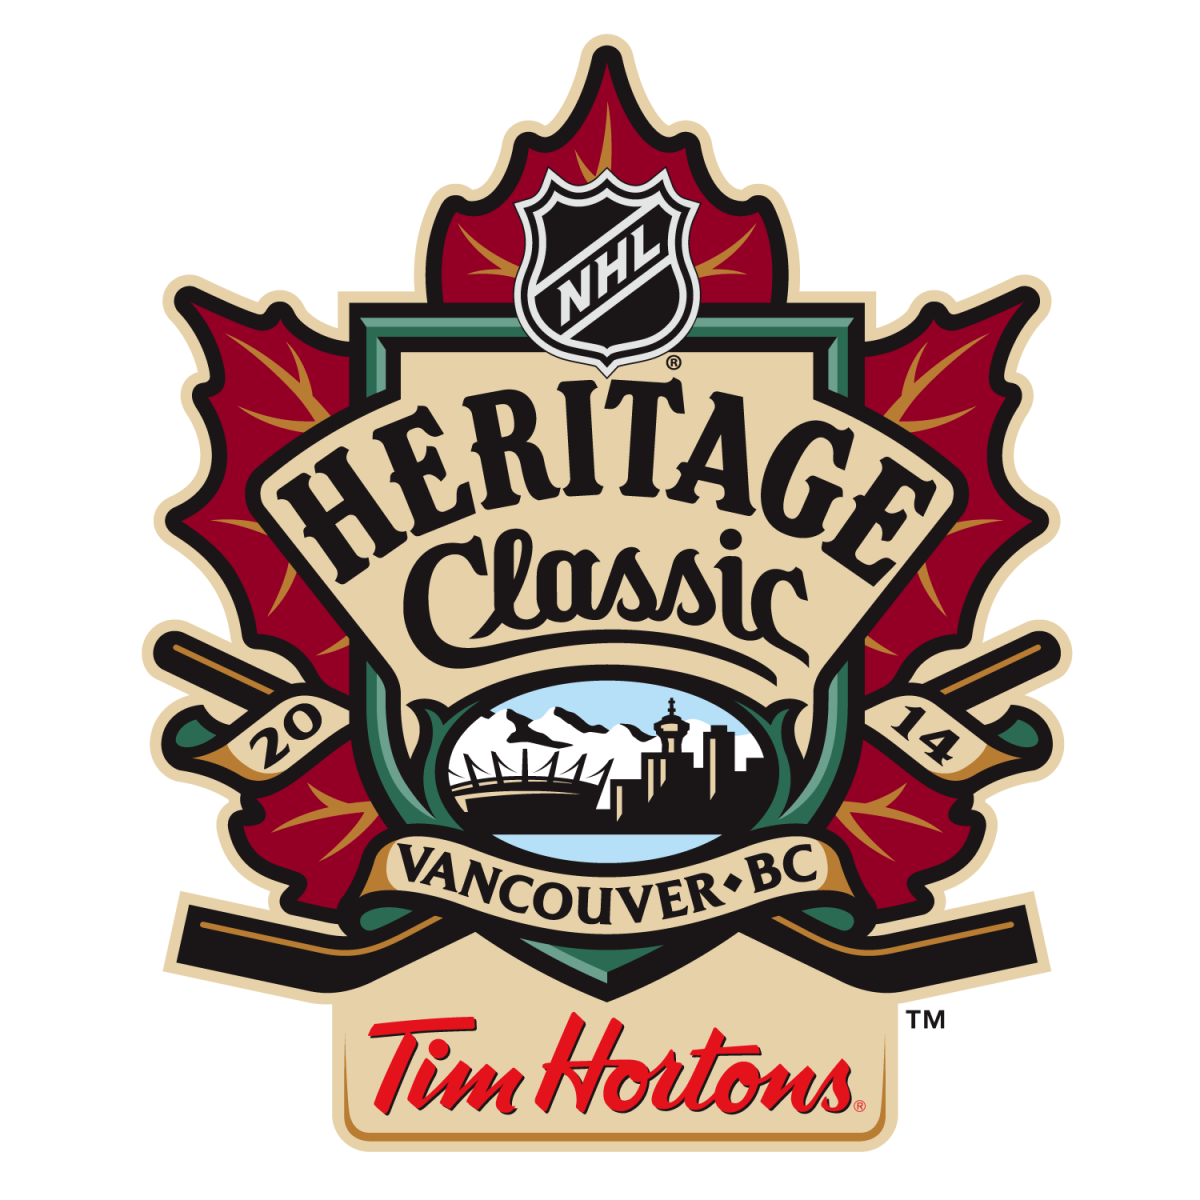 How well do you know Heritage Classic? Take our quiz! - image